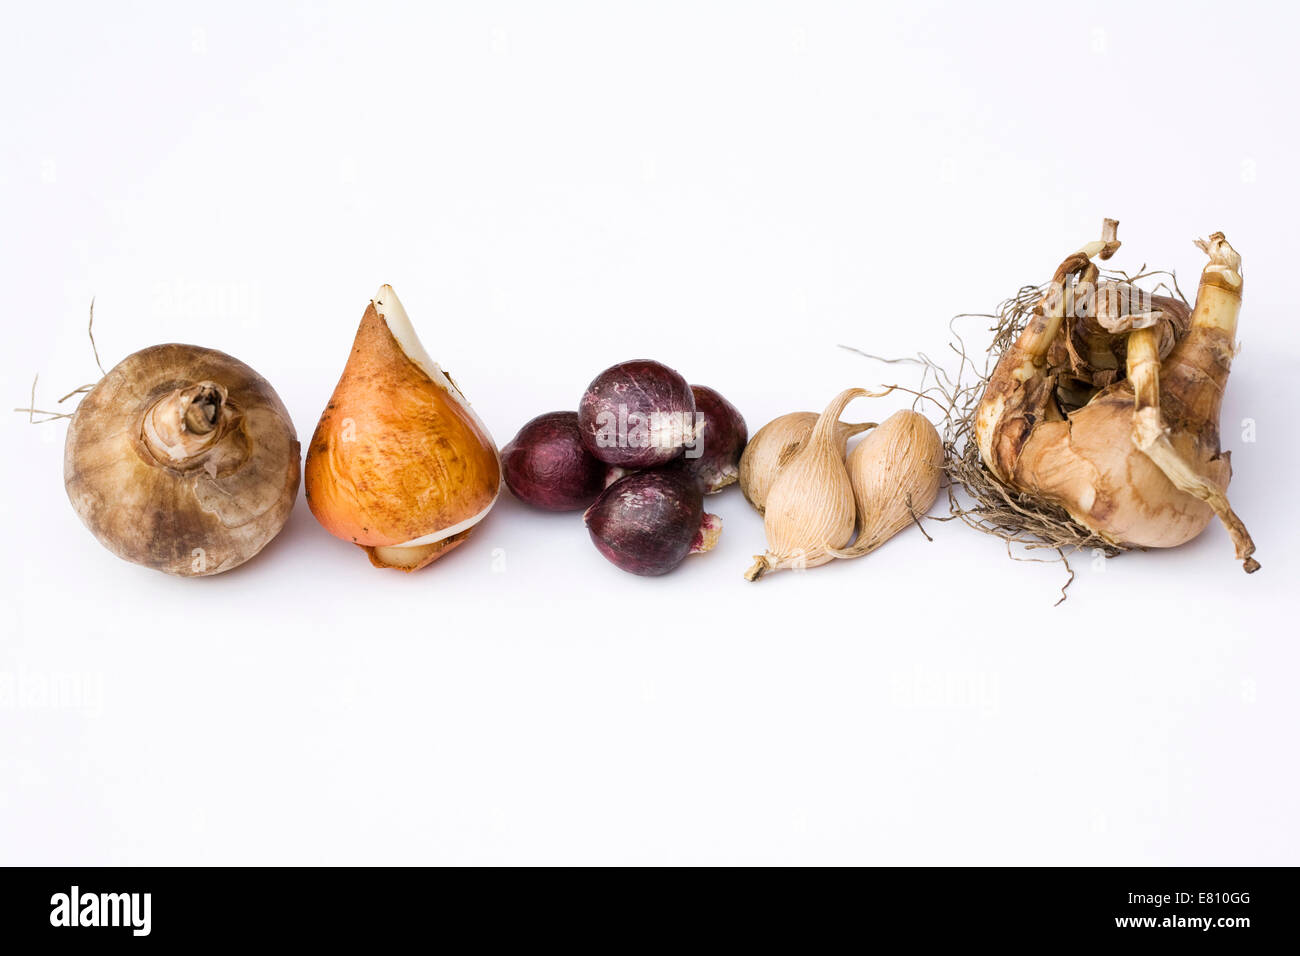 A selection of bulbs ready for planting on a white background. Stock Photo